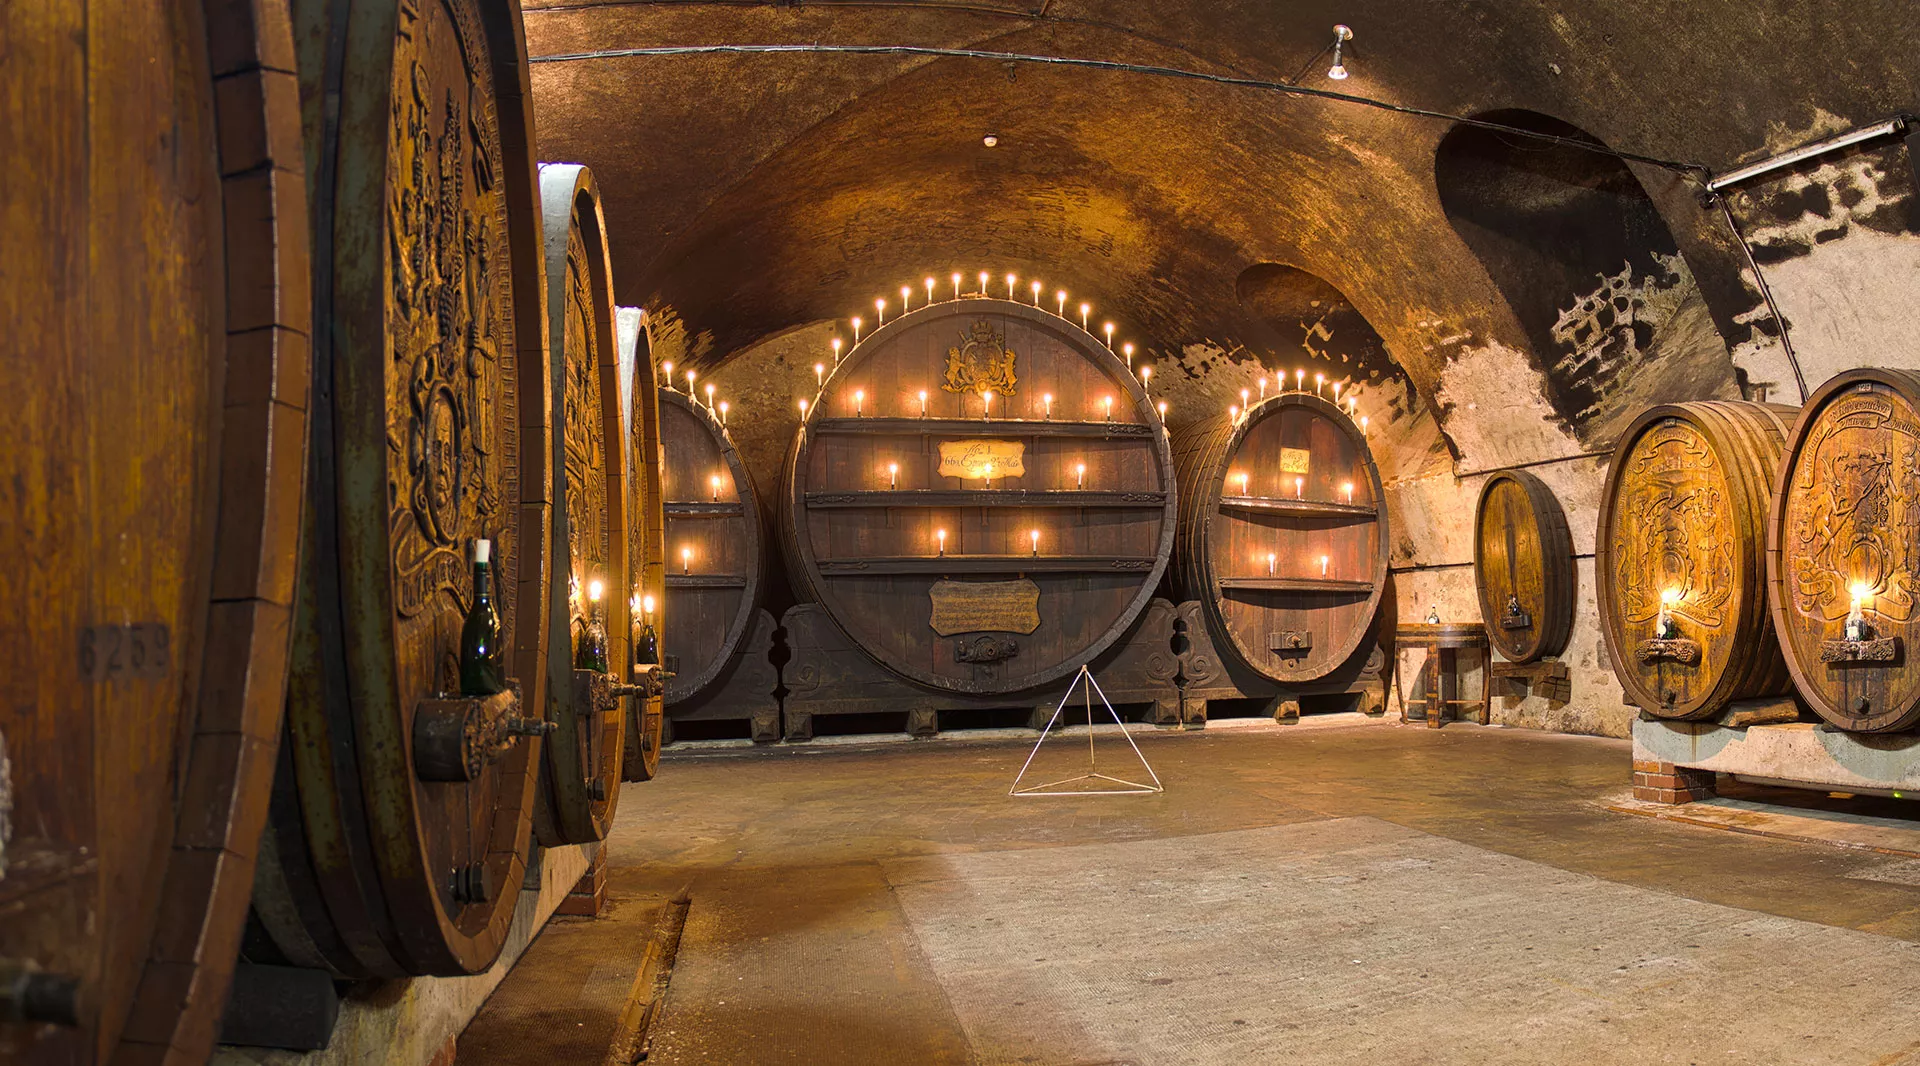 Cellar Radovanovic Winery in Serbia, Europe | Wineries - Rated 0.9